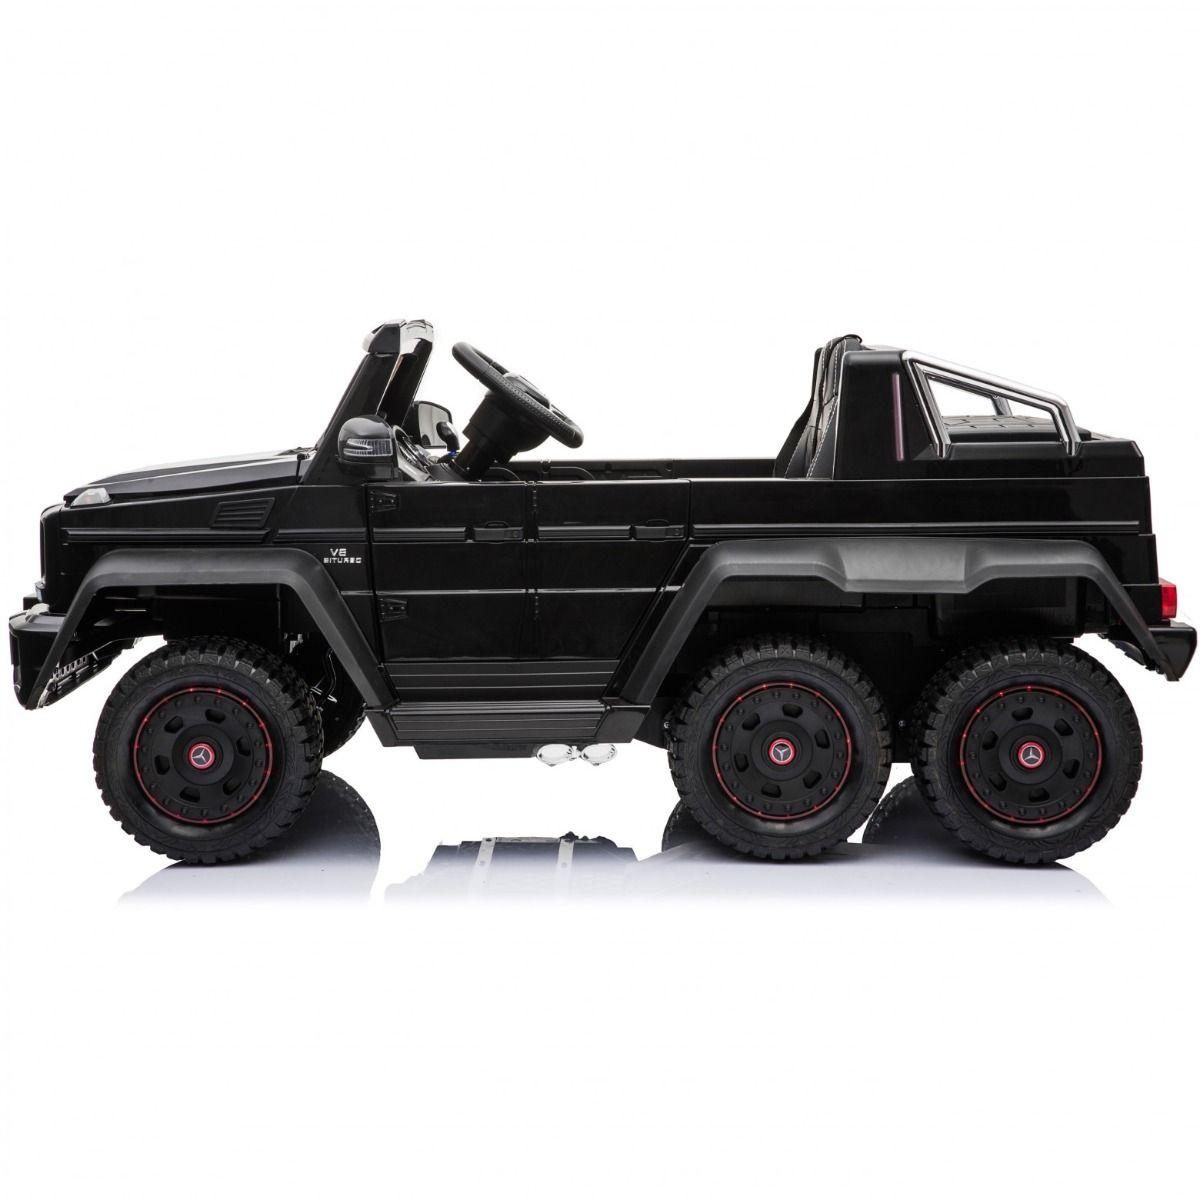 Six-wheeled black Mercedes G65 electric ride on jeep for kids, isolated on white background.